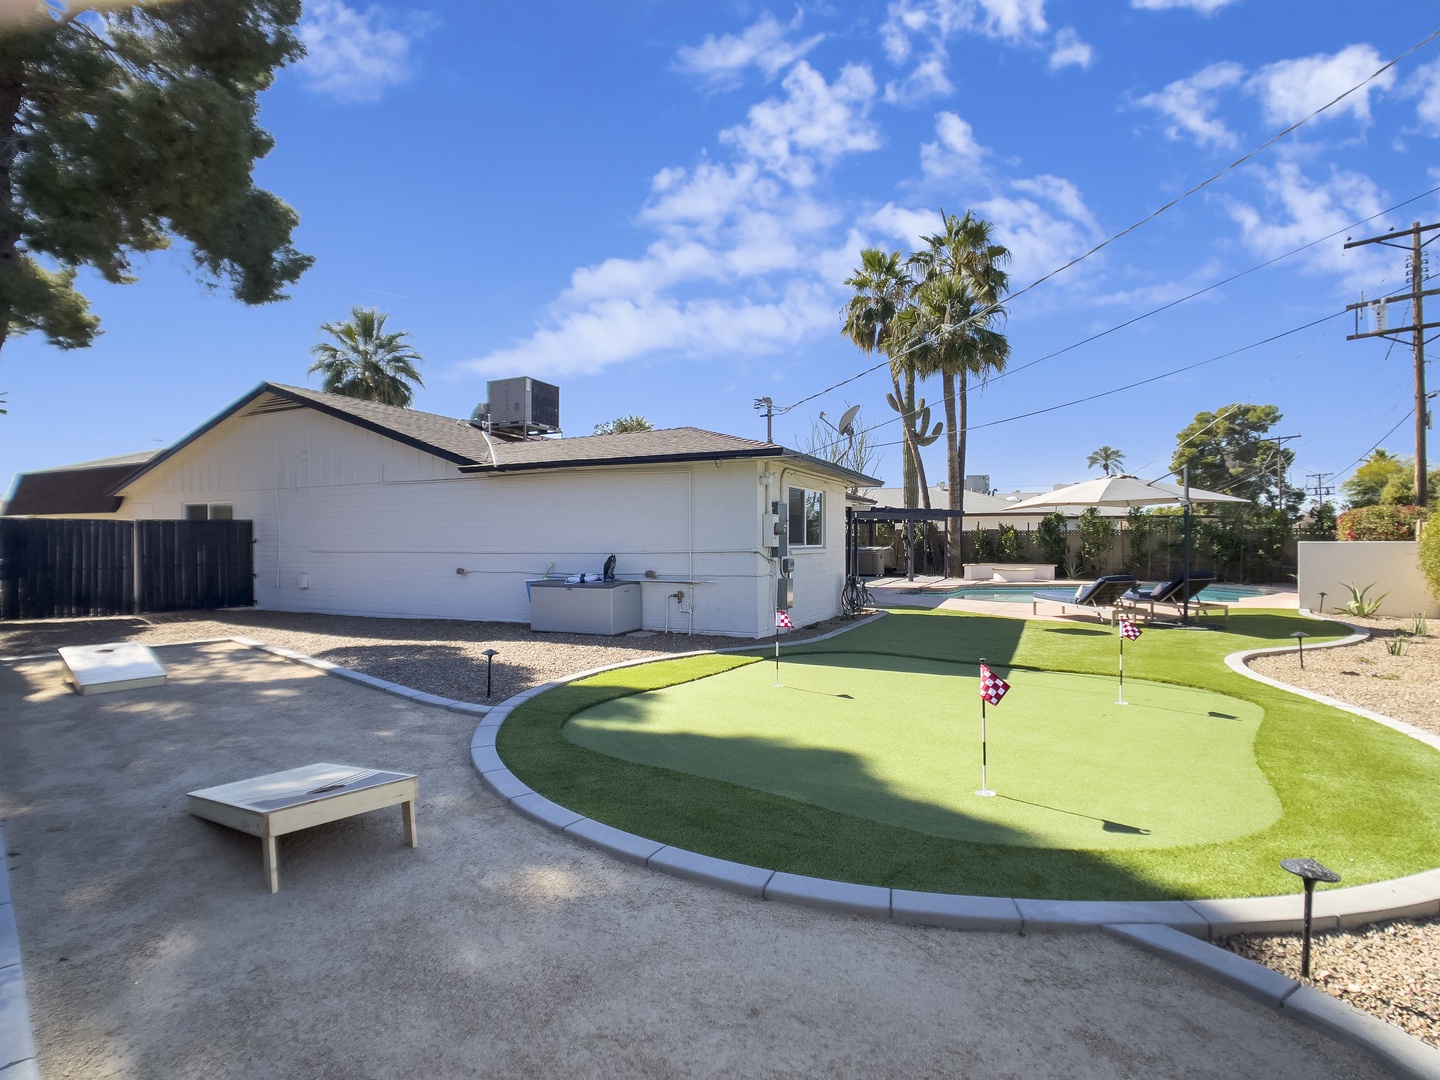 Large Backyard perfect for playing!